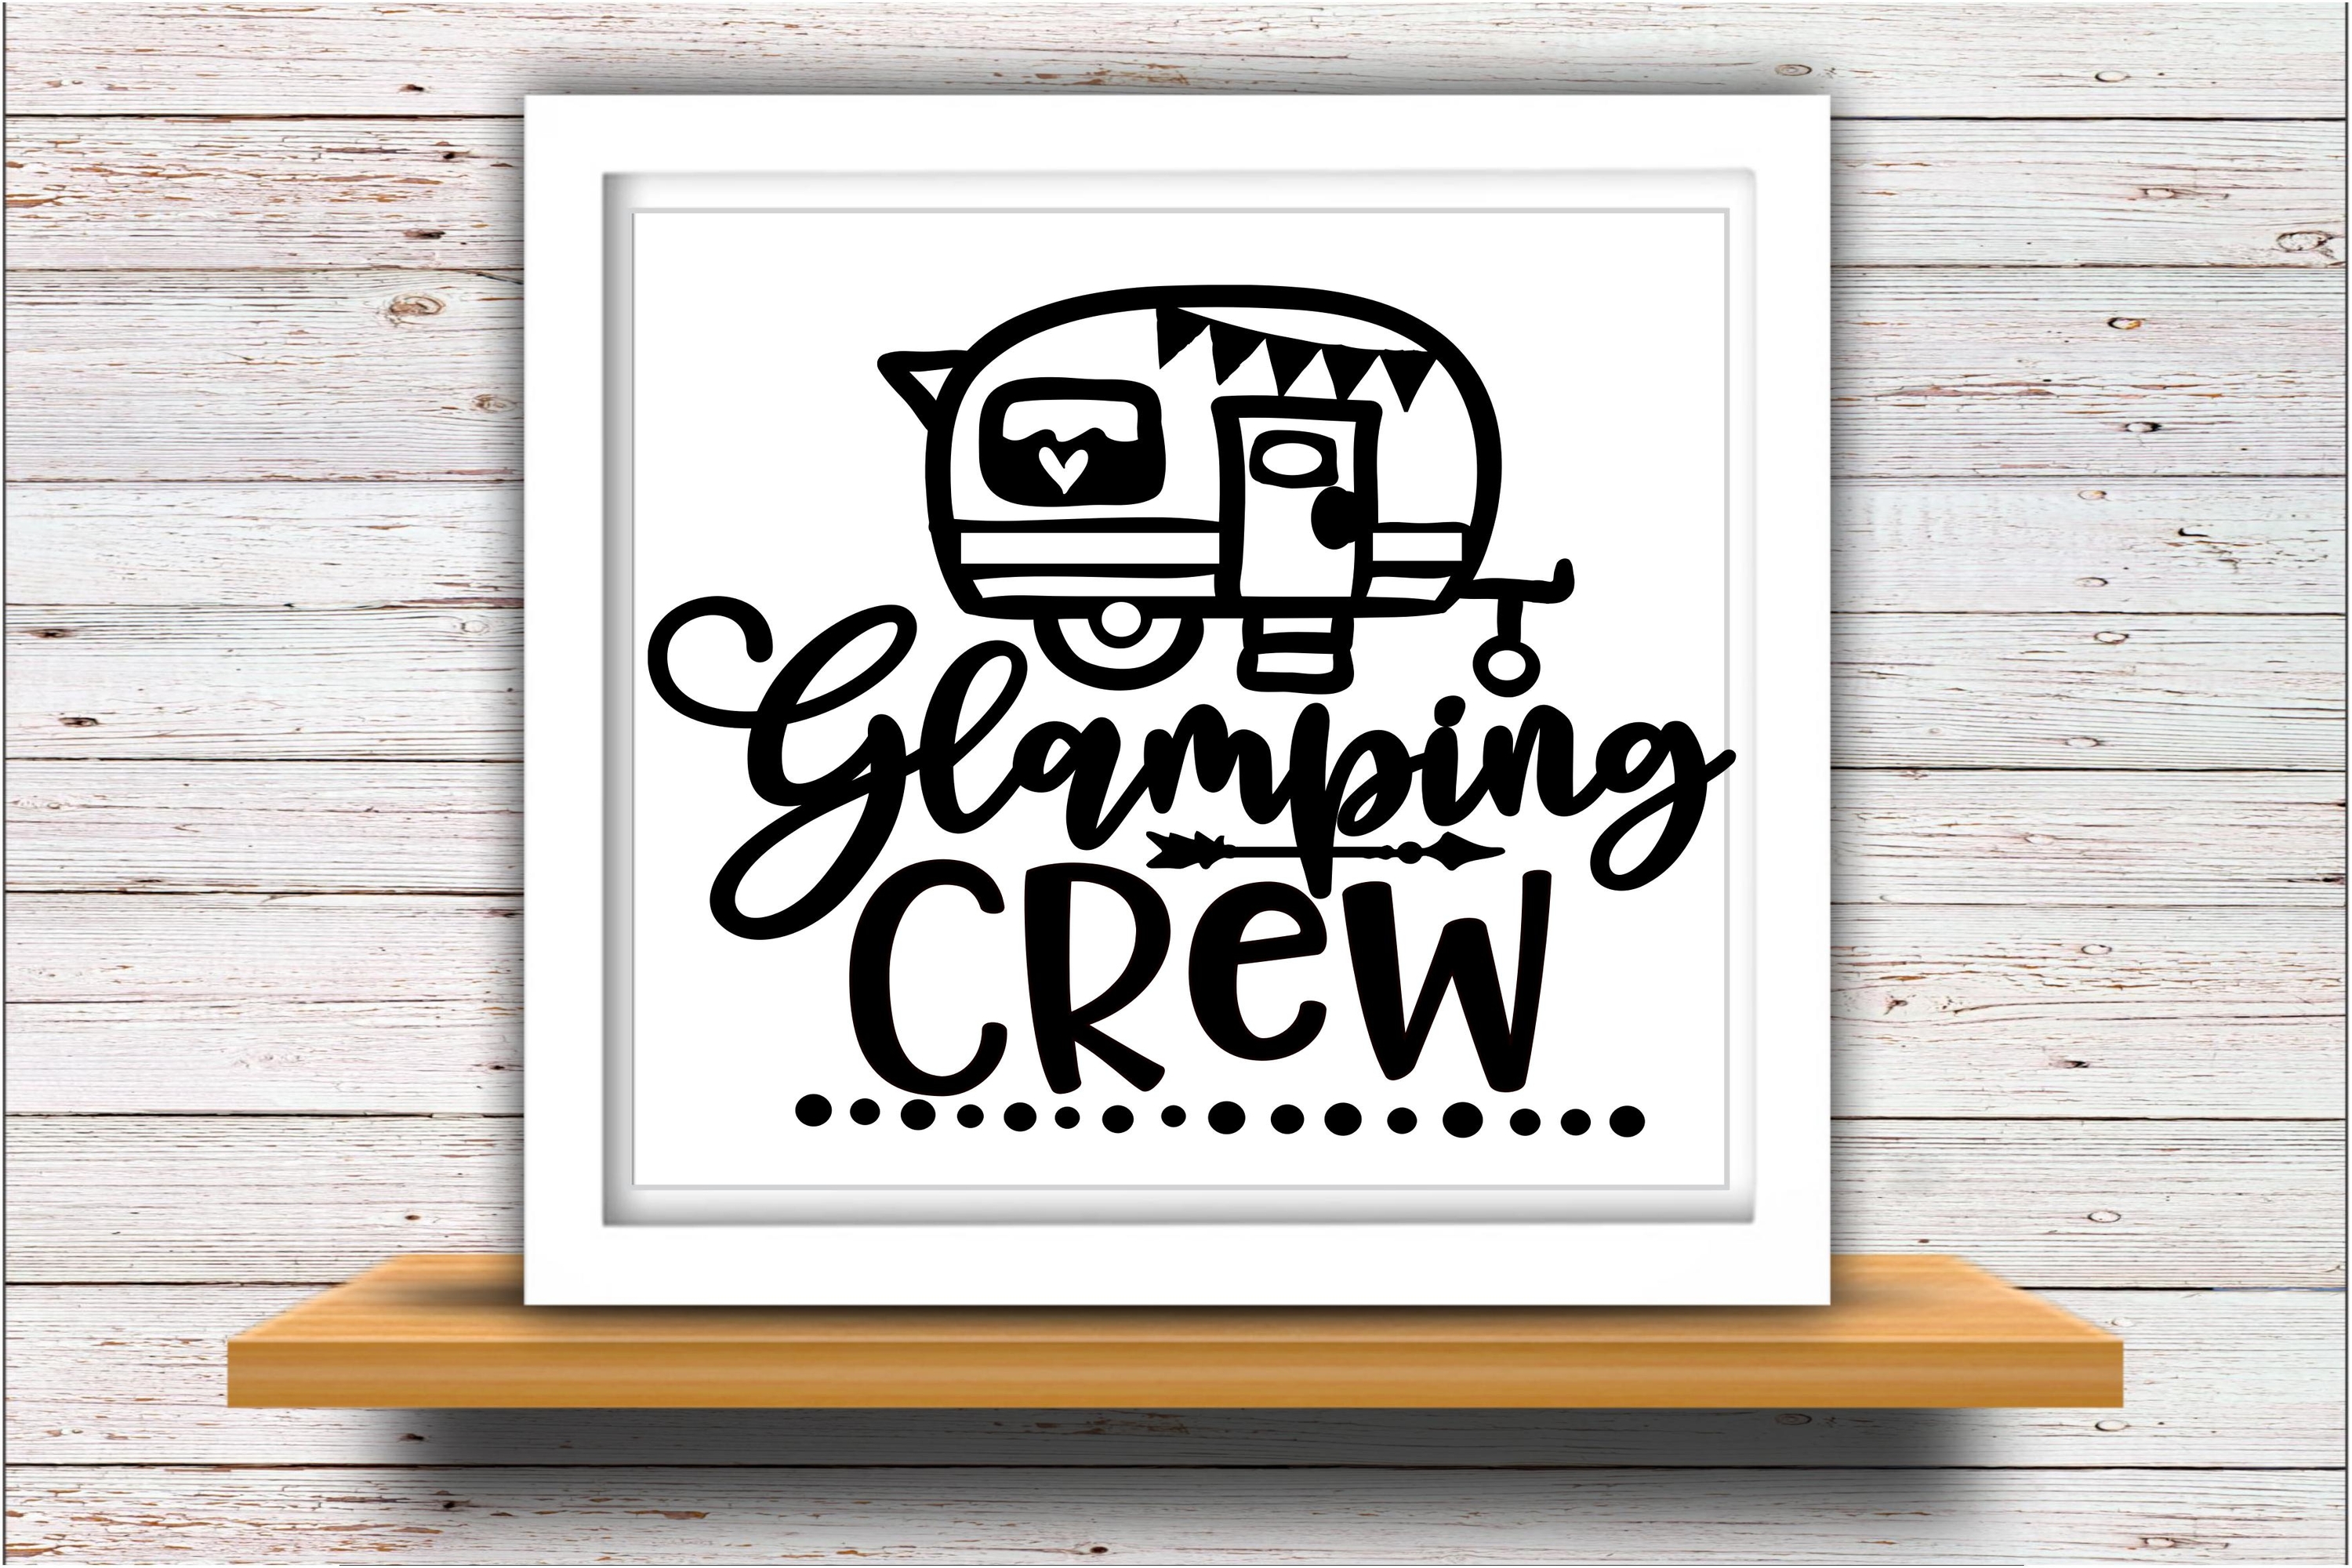 Camping SVG DXF JPEG Silhouette Cameo Cricut Glamping crew